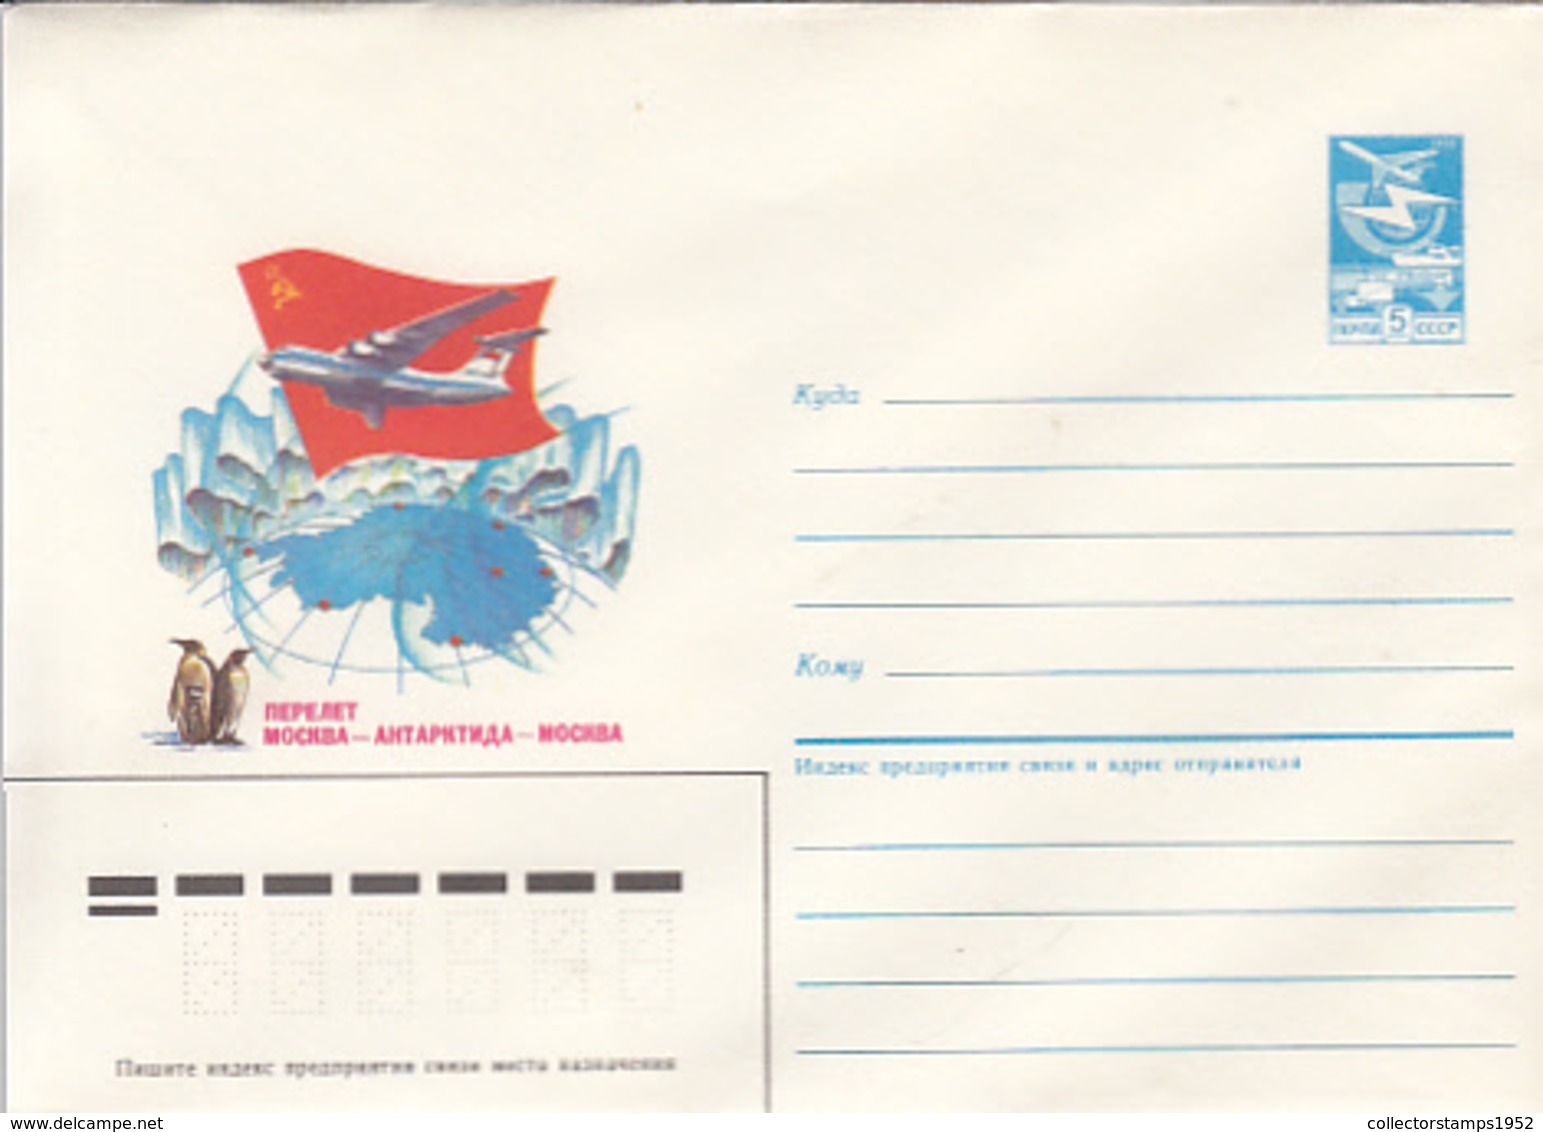 76398- MOSCOW-ANTARCTICA-MOSCOW FLIGHT, PLANE, PENGUINS, POLAR FLIGHTS, COVER STATIONERY, 1986, RUSSIA-USSR - Vuelos Polares